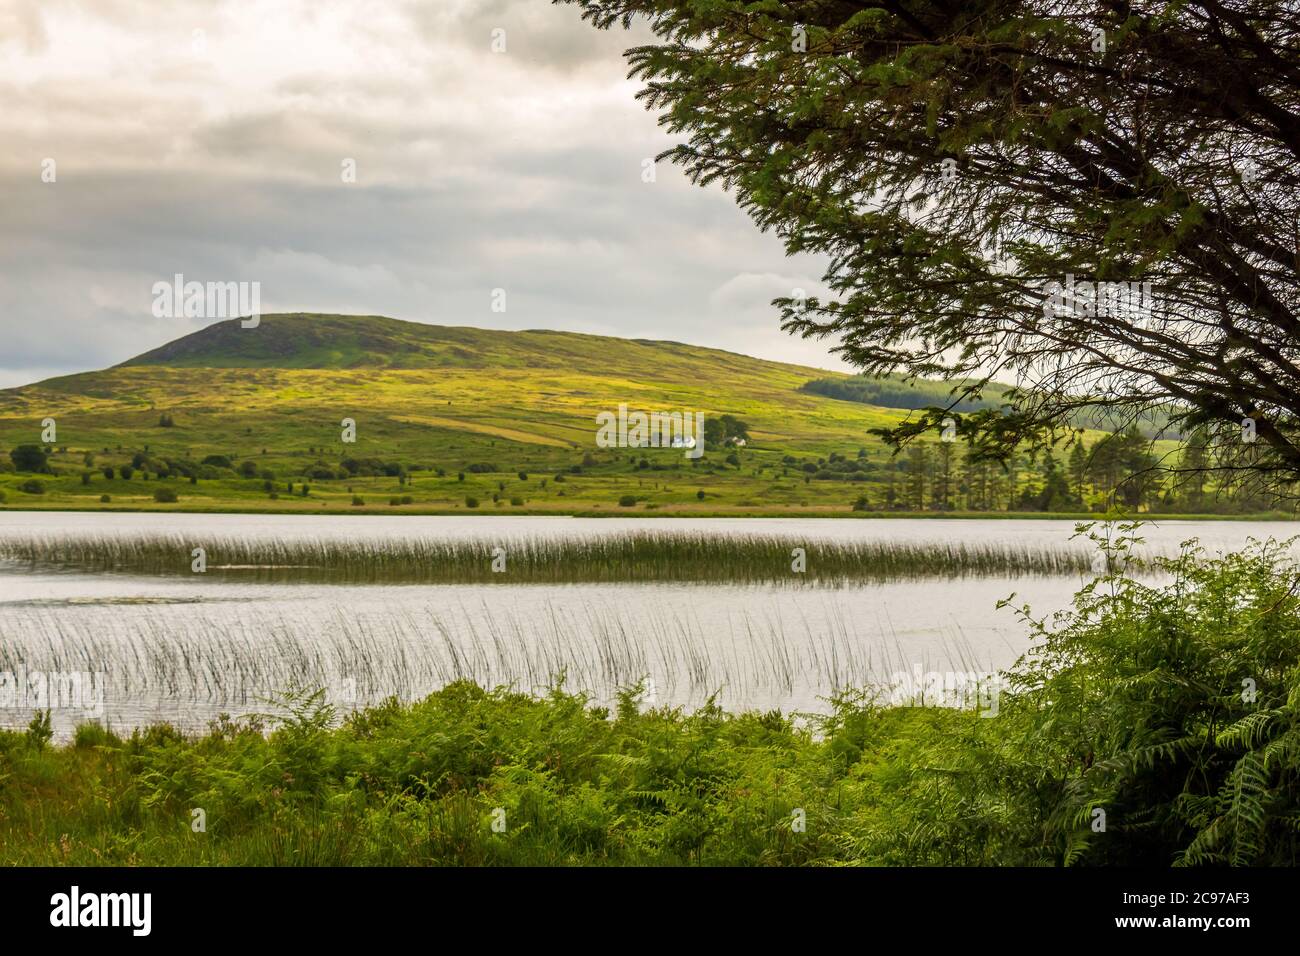 A view of Loch Stroan with a reed bed and the hills in the background, Galloway, Scotland Stock Photo